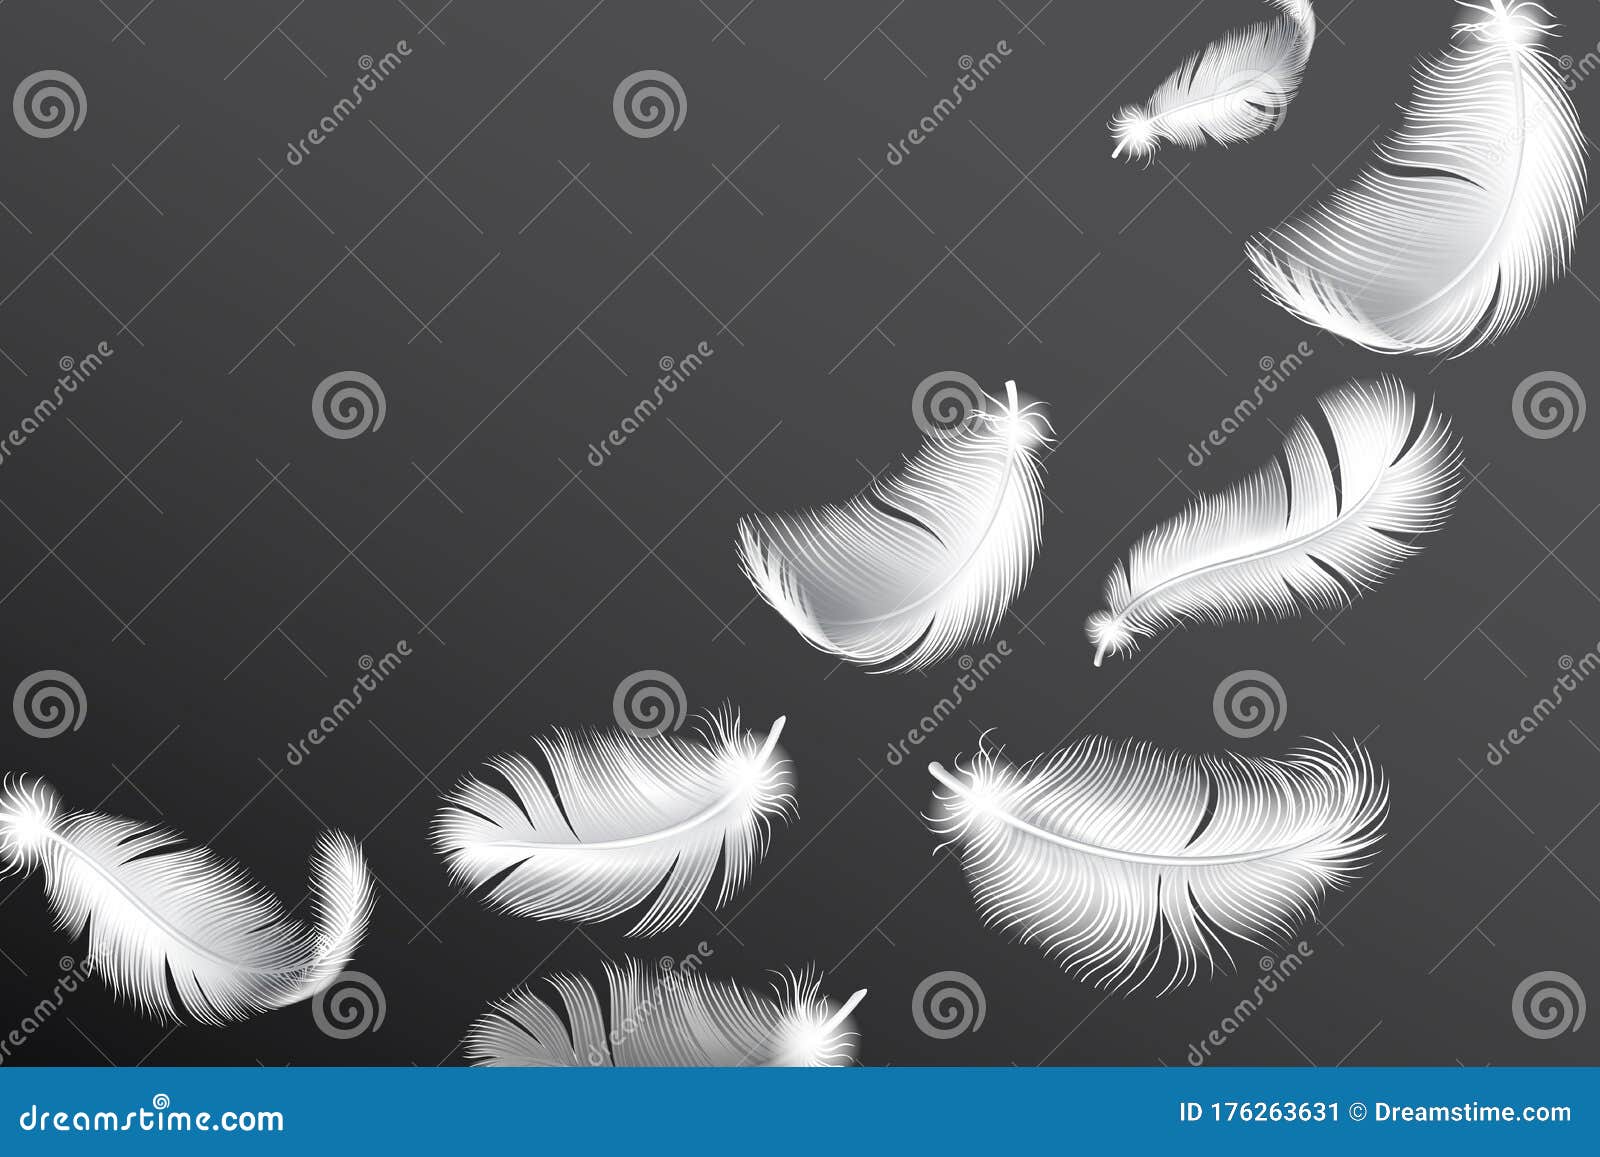 Download Flying White Feathers. Falling Realistic Bird Or Angel ...